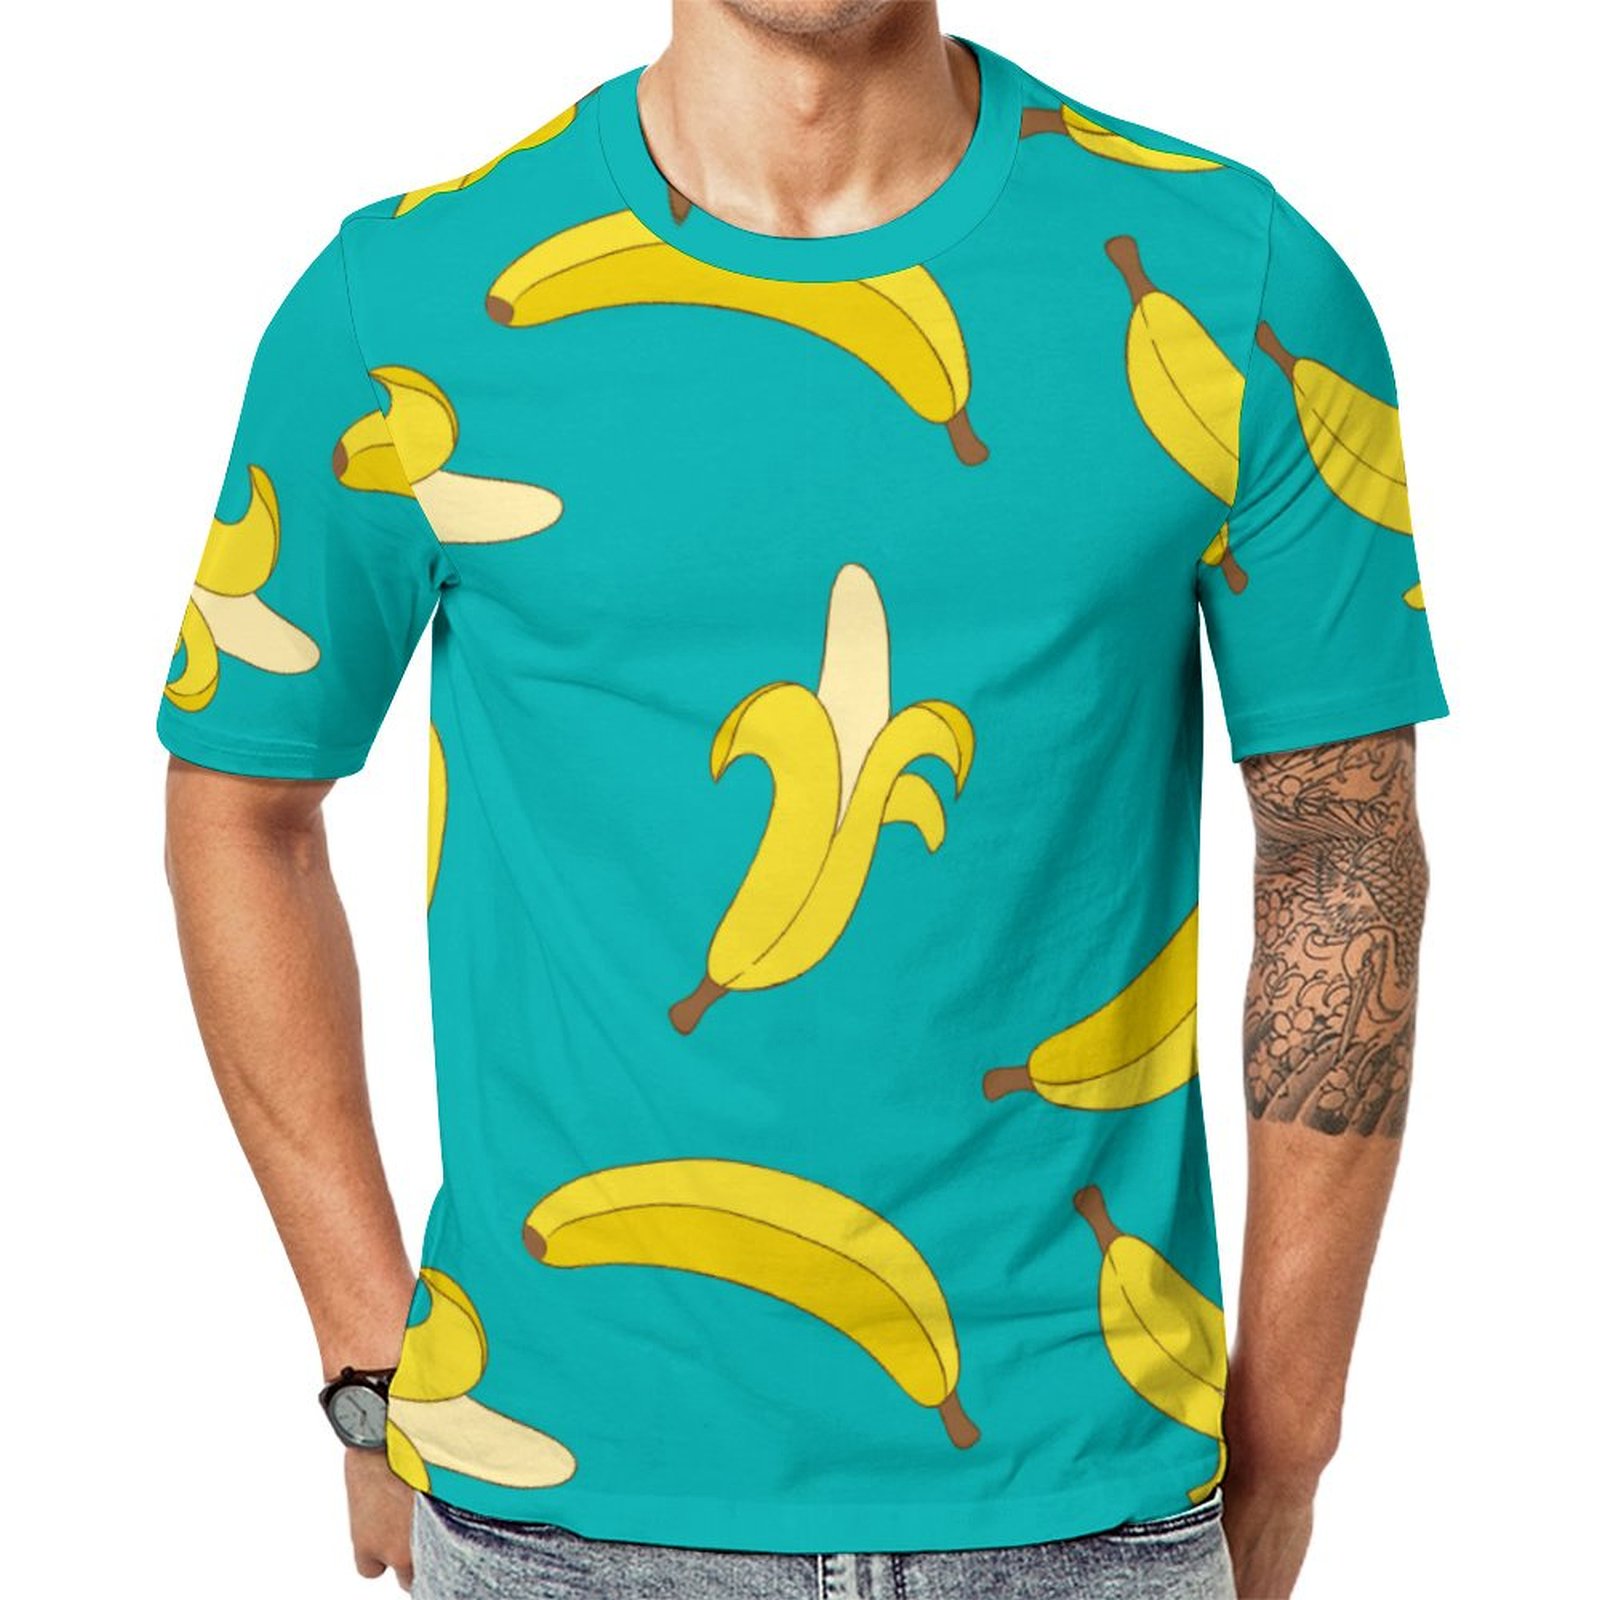 Blue Gone Bananas Illustrated Short Sleeve Print Unisex Tshirt Summer Casual Tees for Men and Women Coolcoshirts